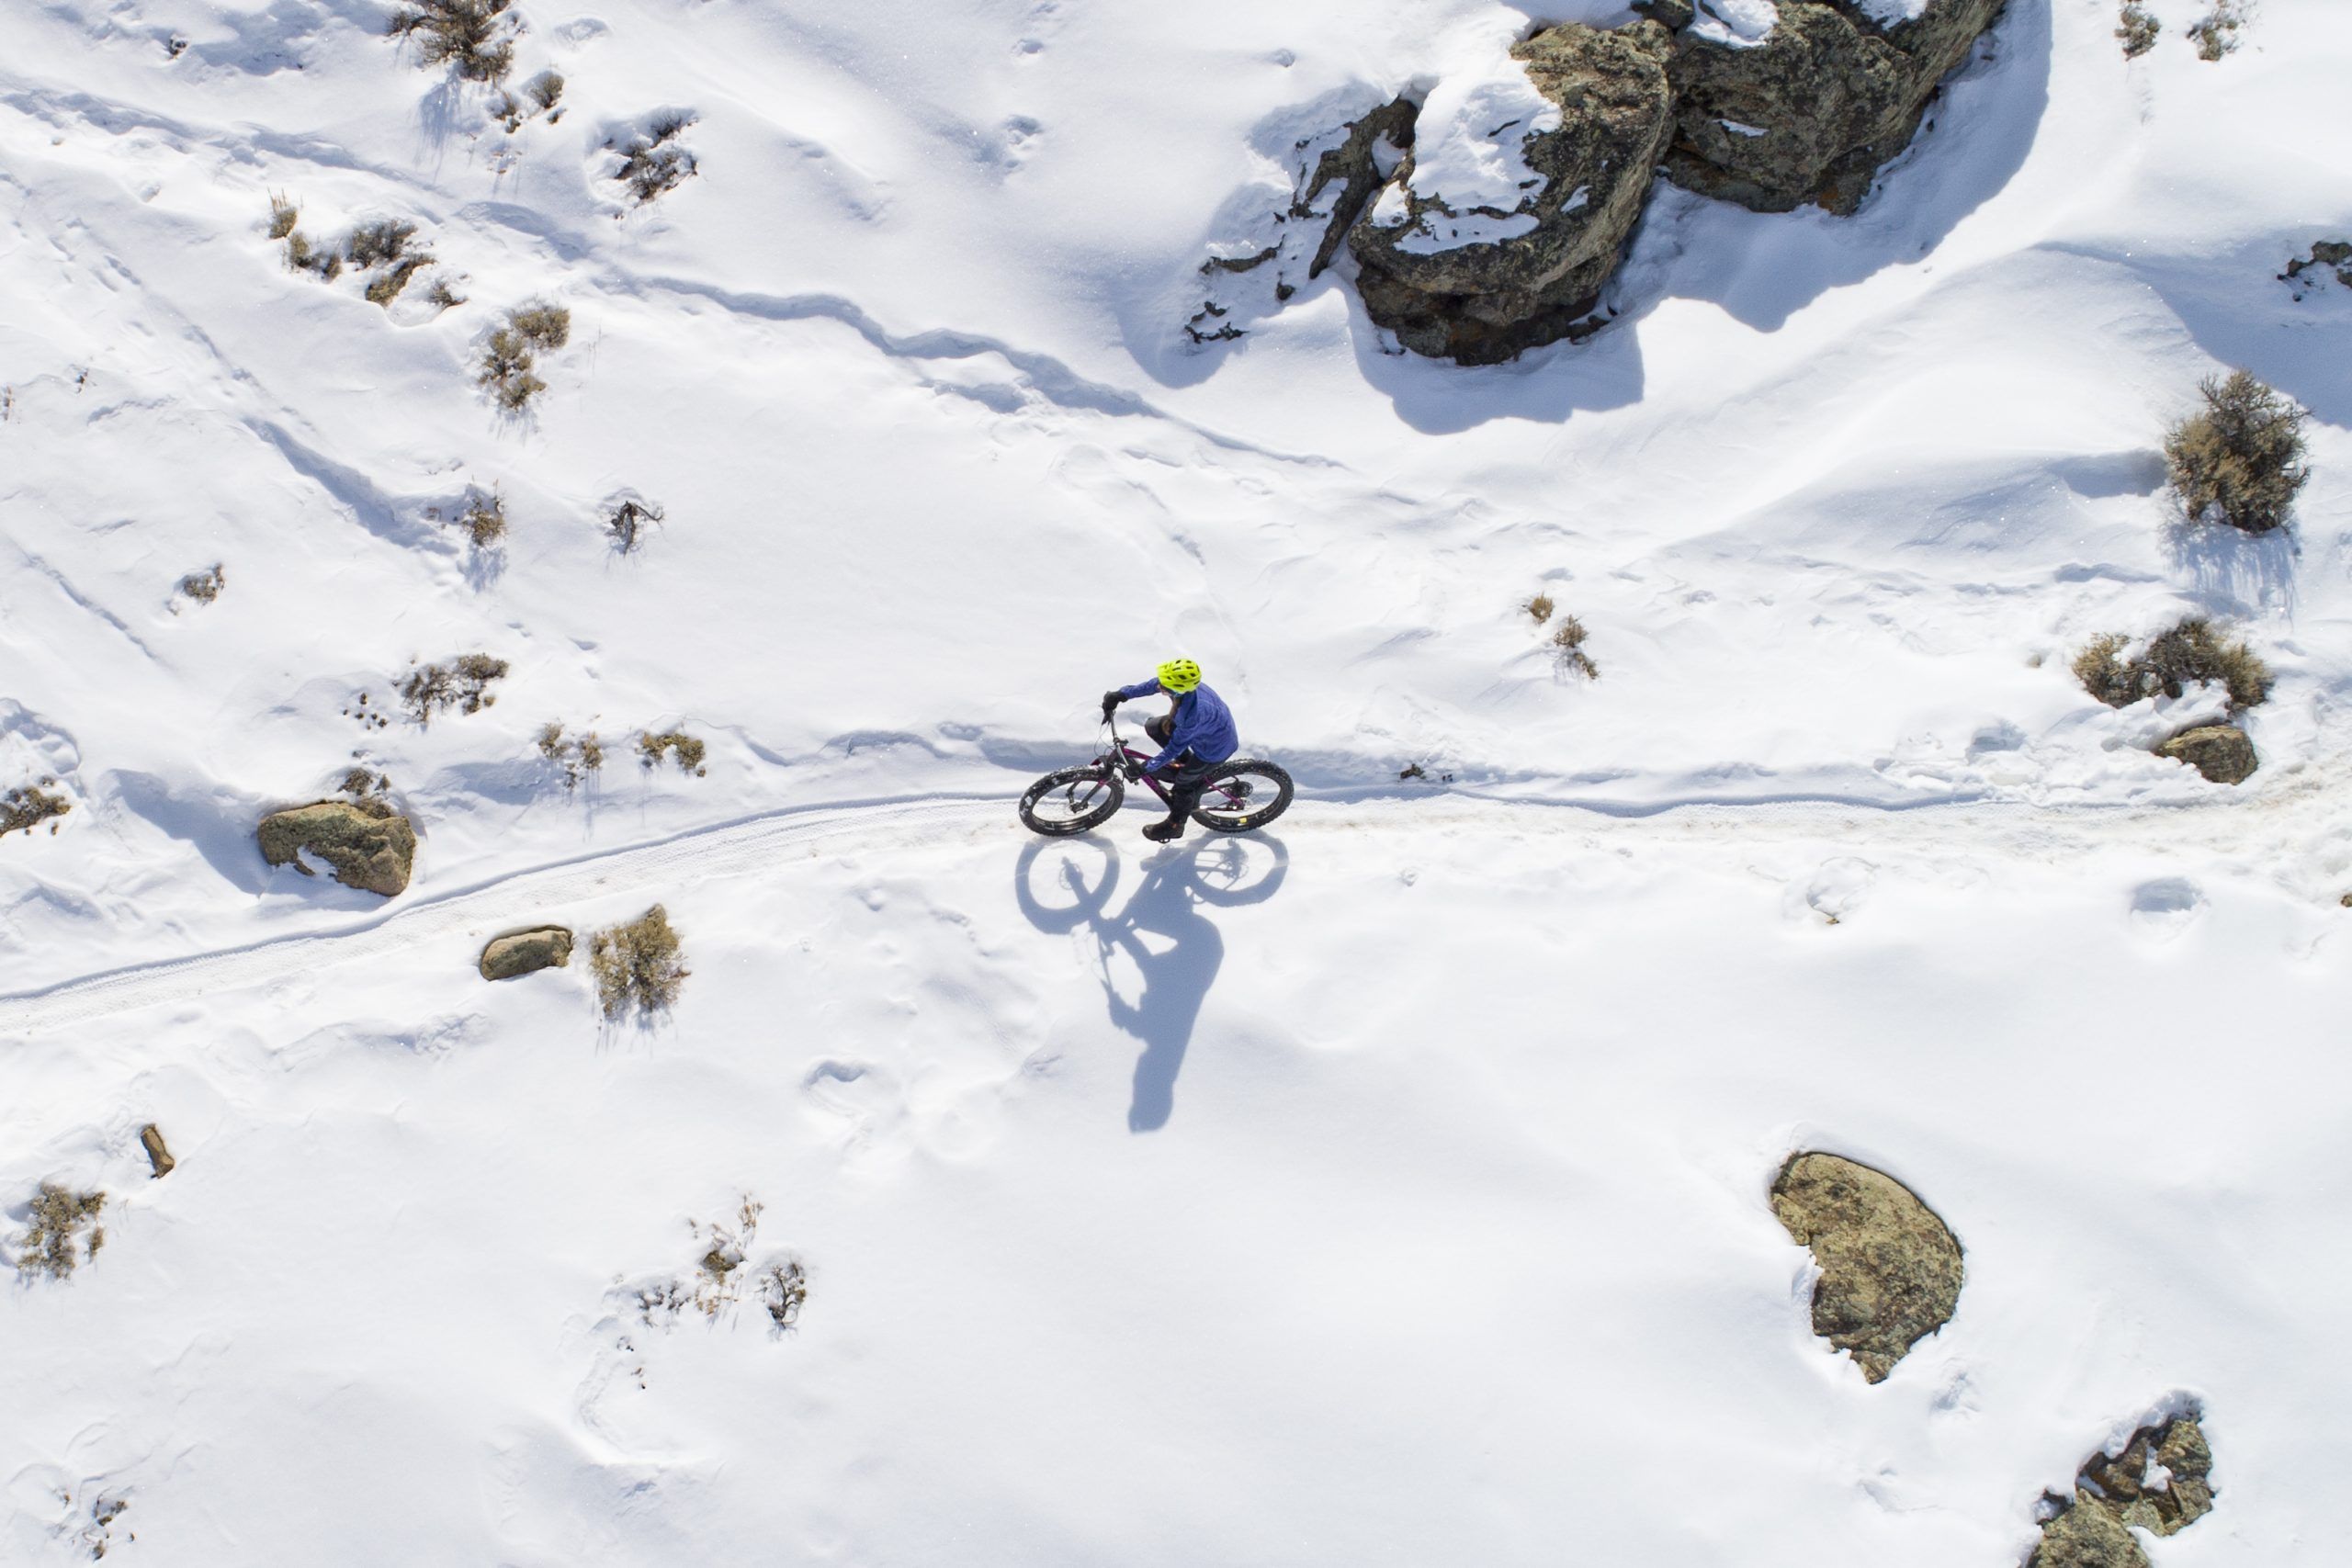 Someone rides a fat bike over a snowy, high desert landscape on a sunny day.